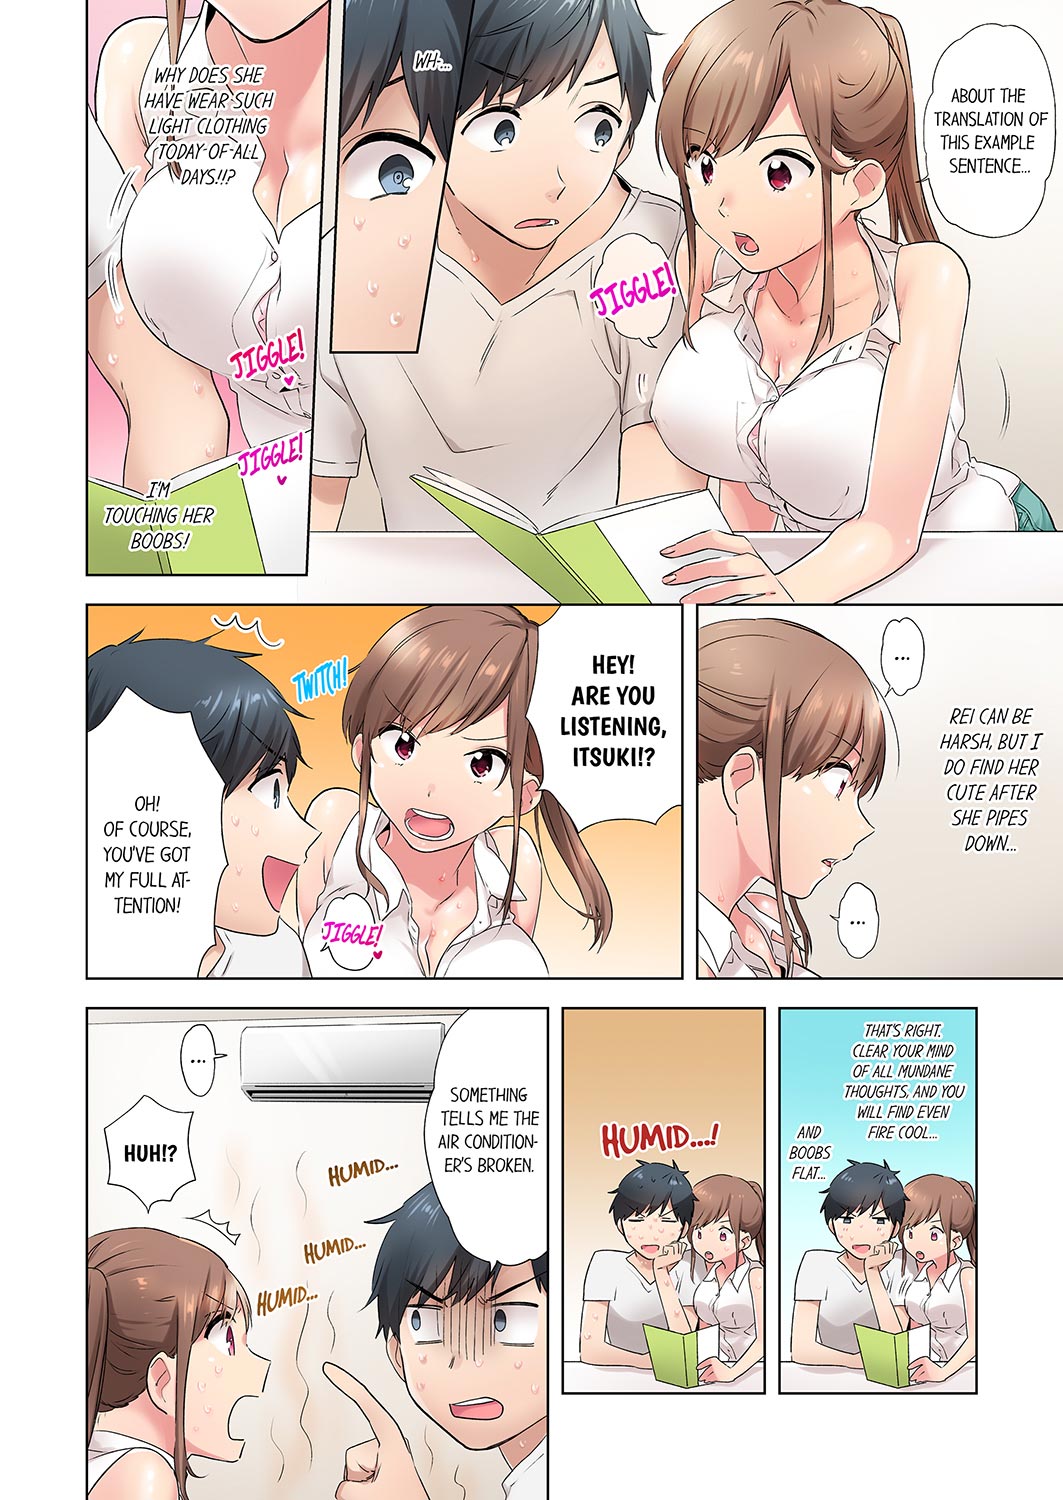 A Scorching Hot Day with A Broken Air Conditioner - Chapter 1 Page 4